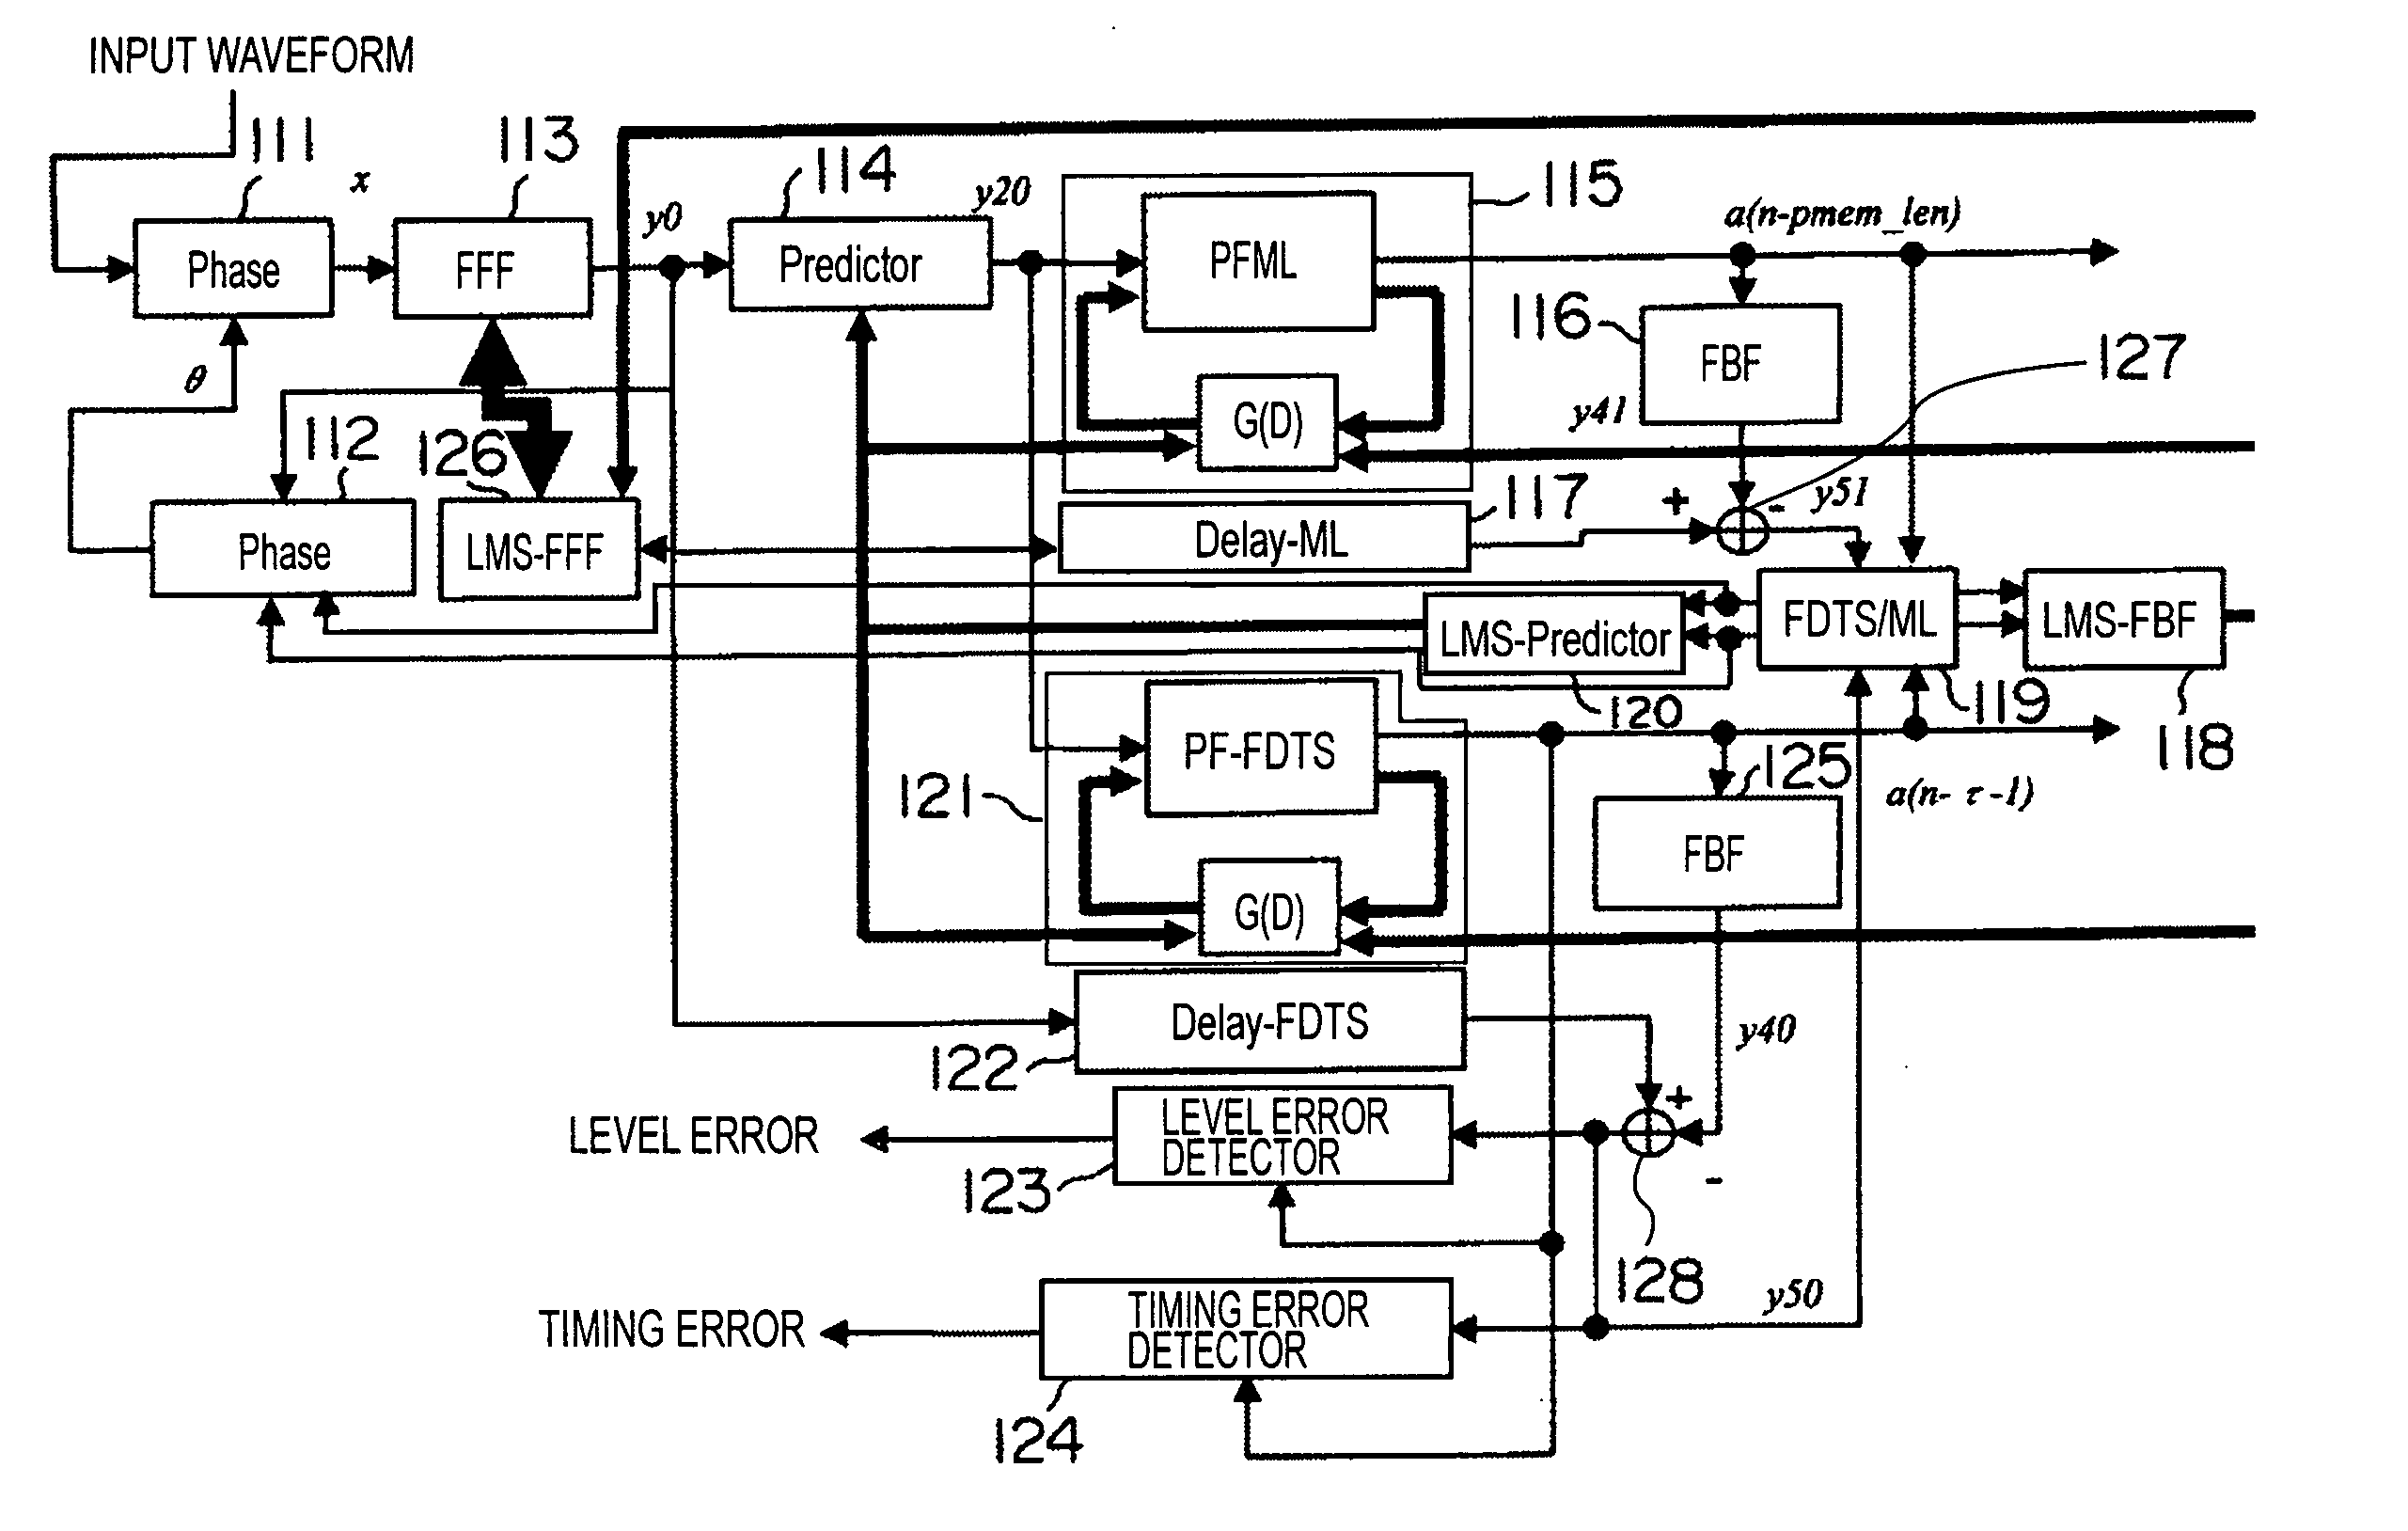 Adaptive equalizer, decoding device, and error detecting device